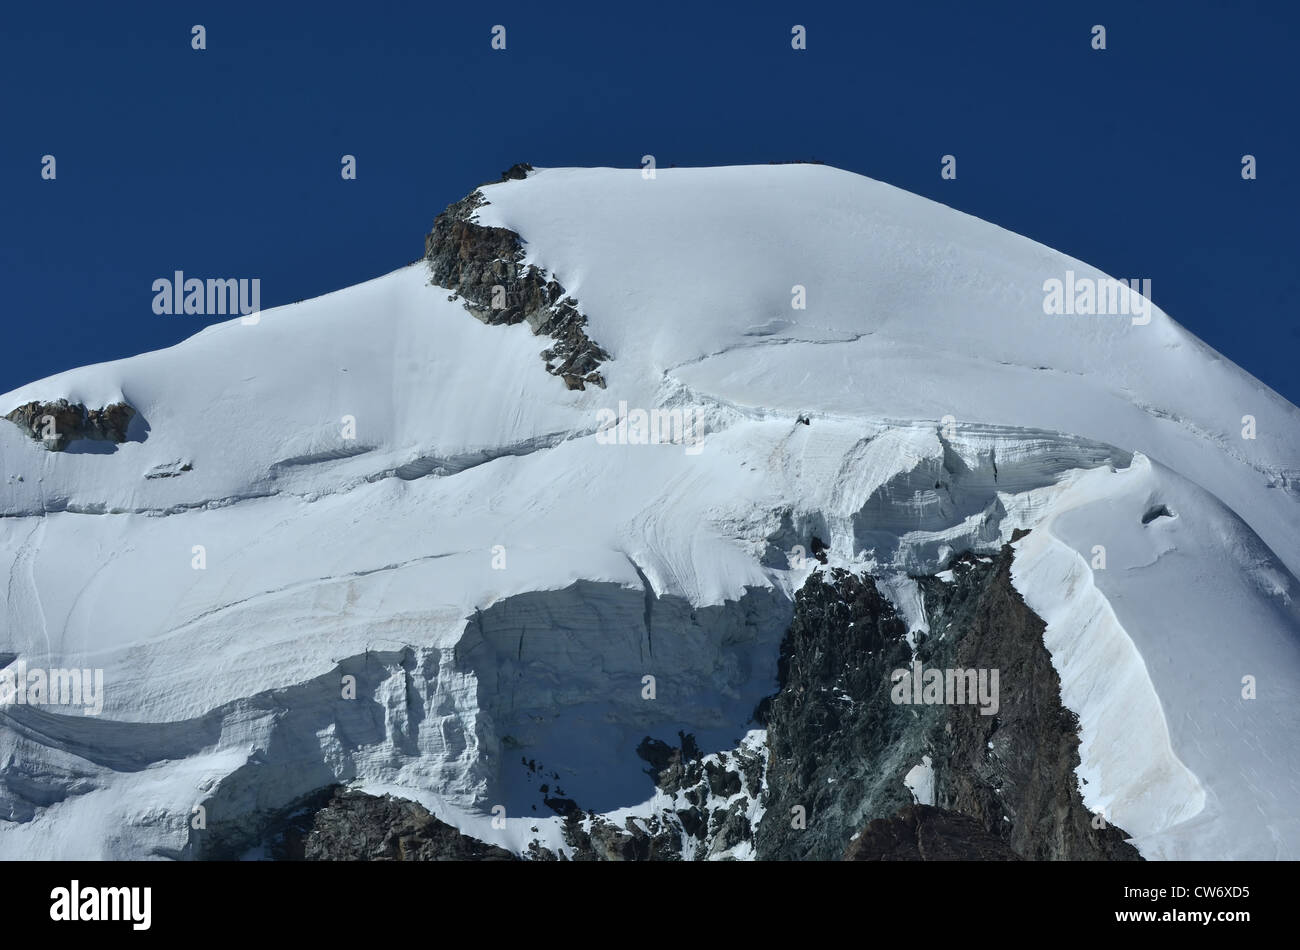 the summit and north face of the Allalinhorn in the southern swiss alps between Zermatt and Saas Fee. Showing a team of climbers Stock Photo